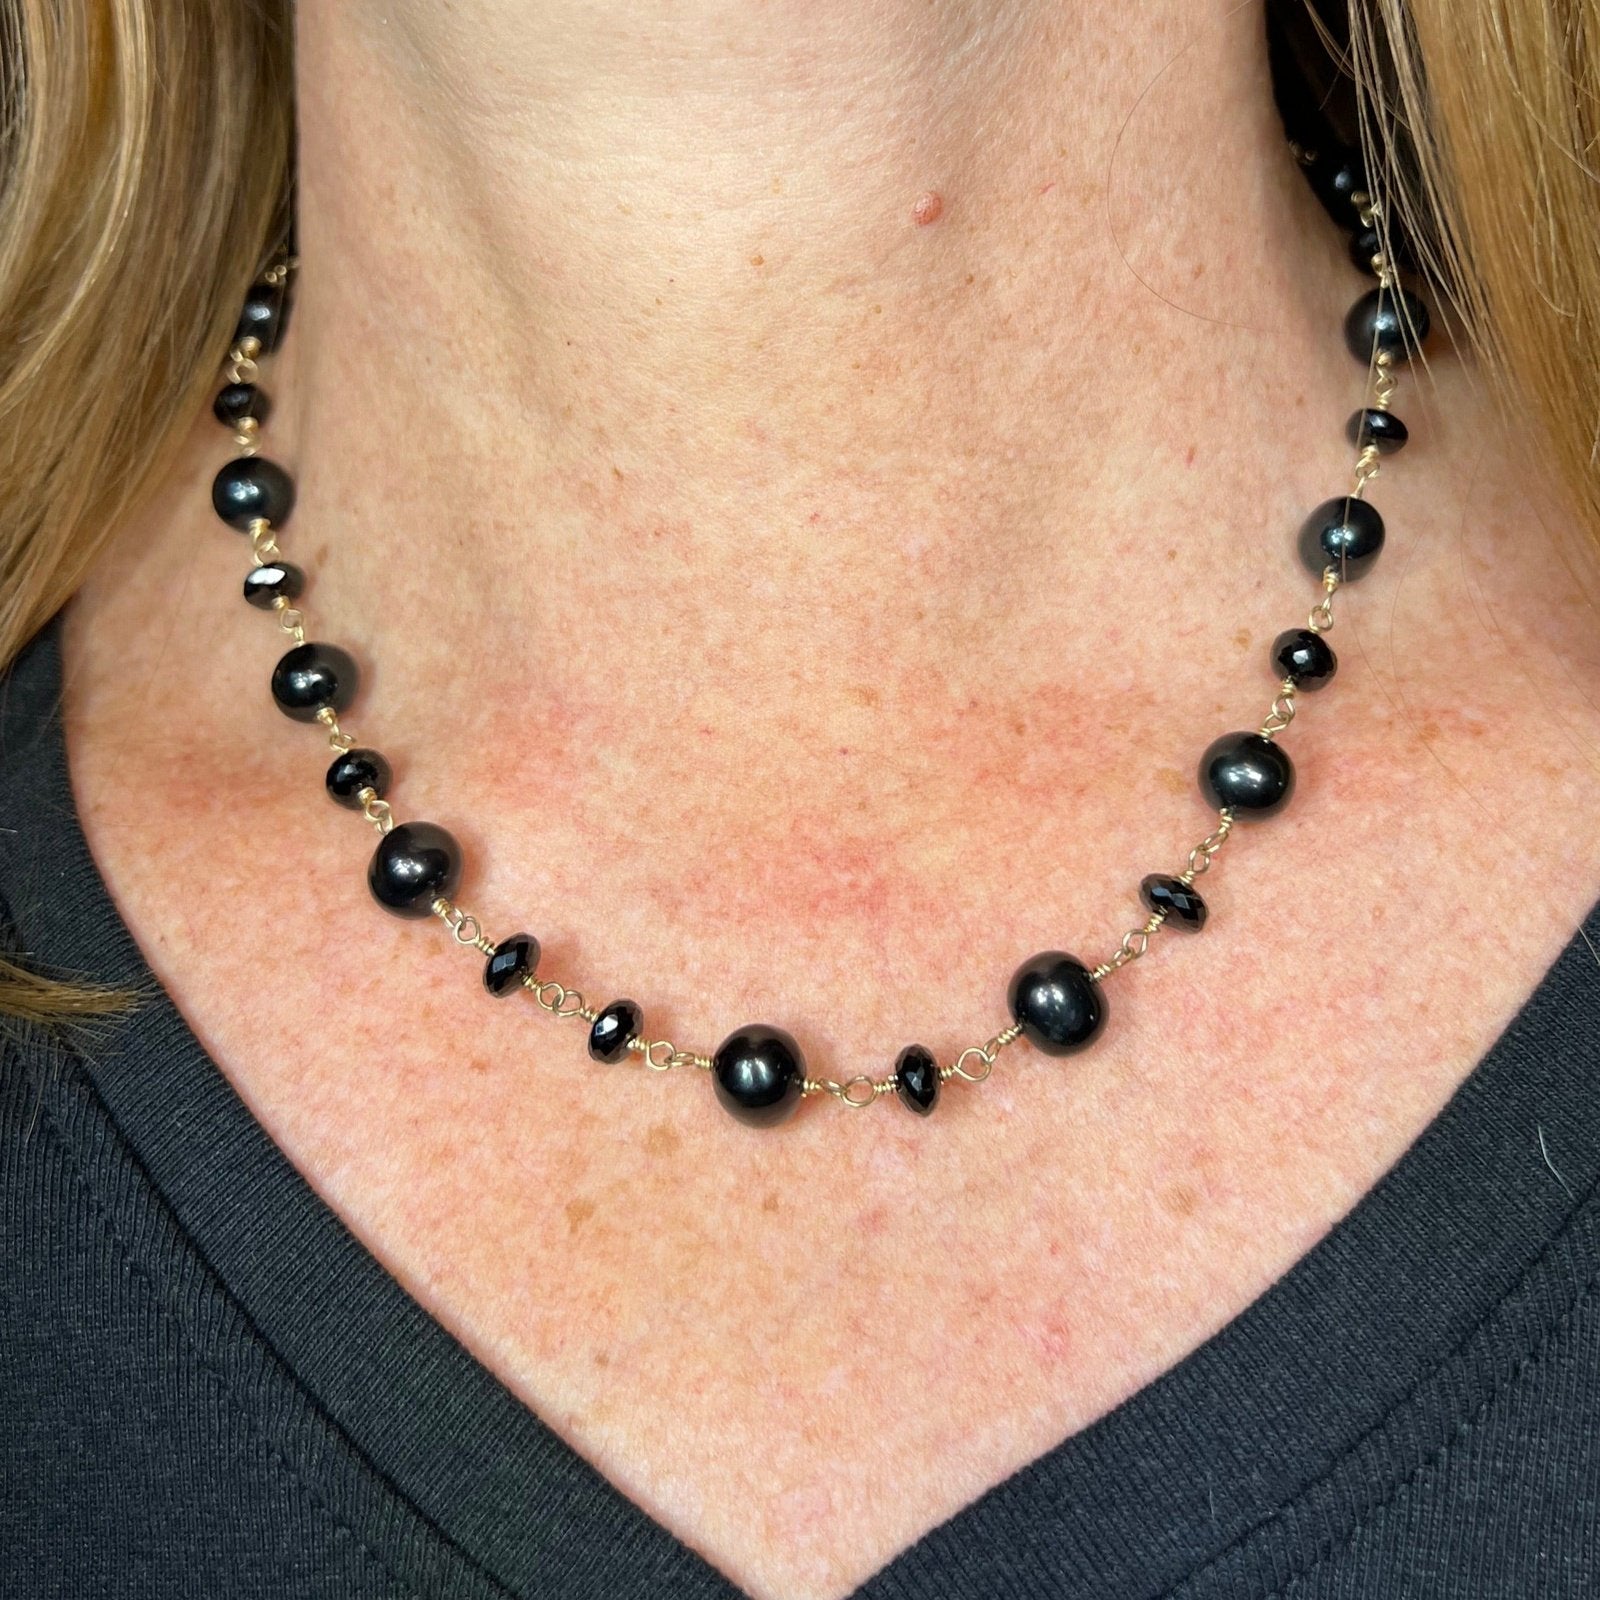 14k Gold Black Pearl + Onyx Station Chain Necklace. 26g